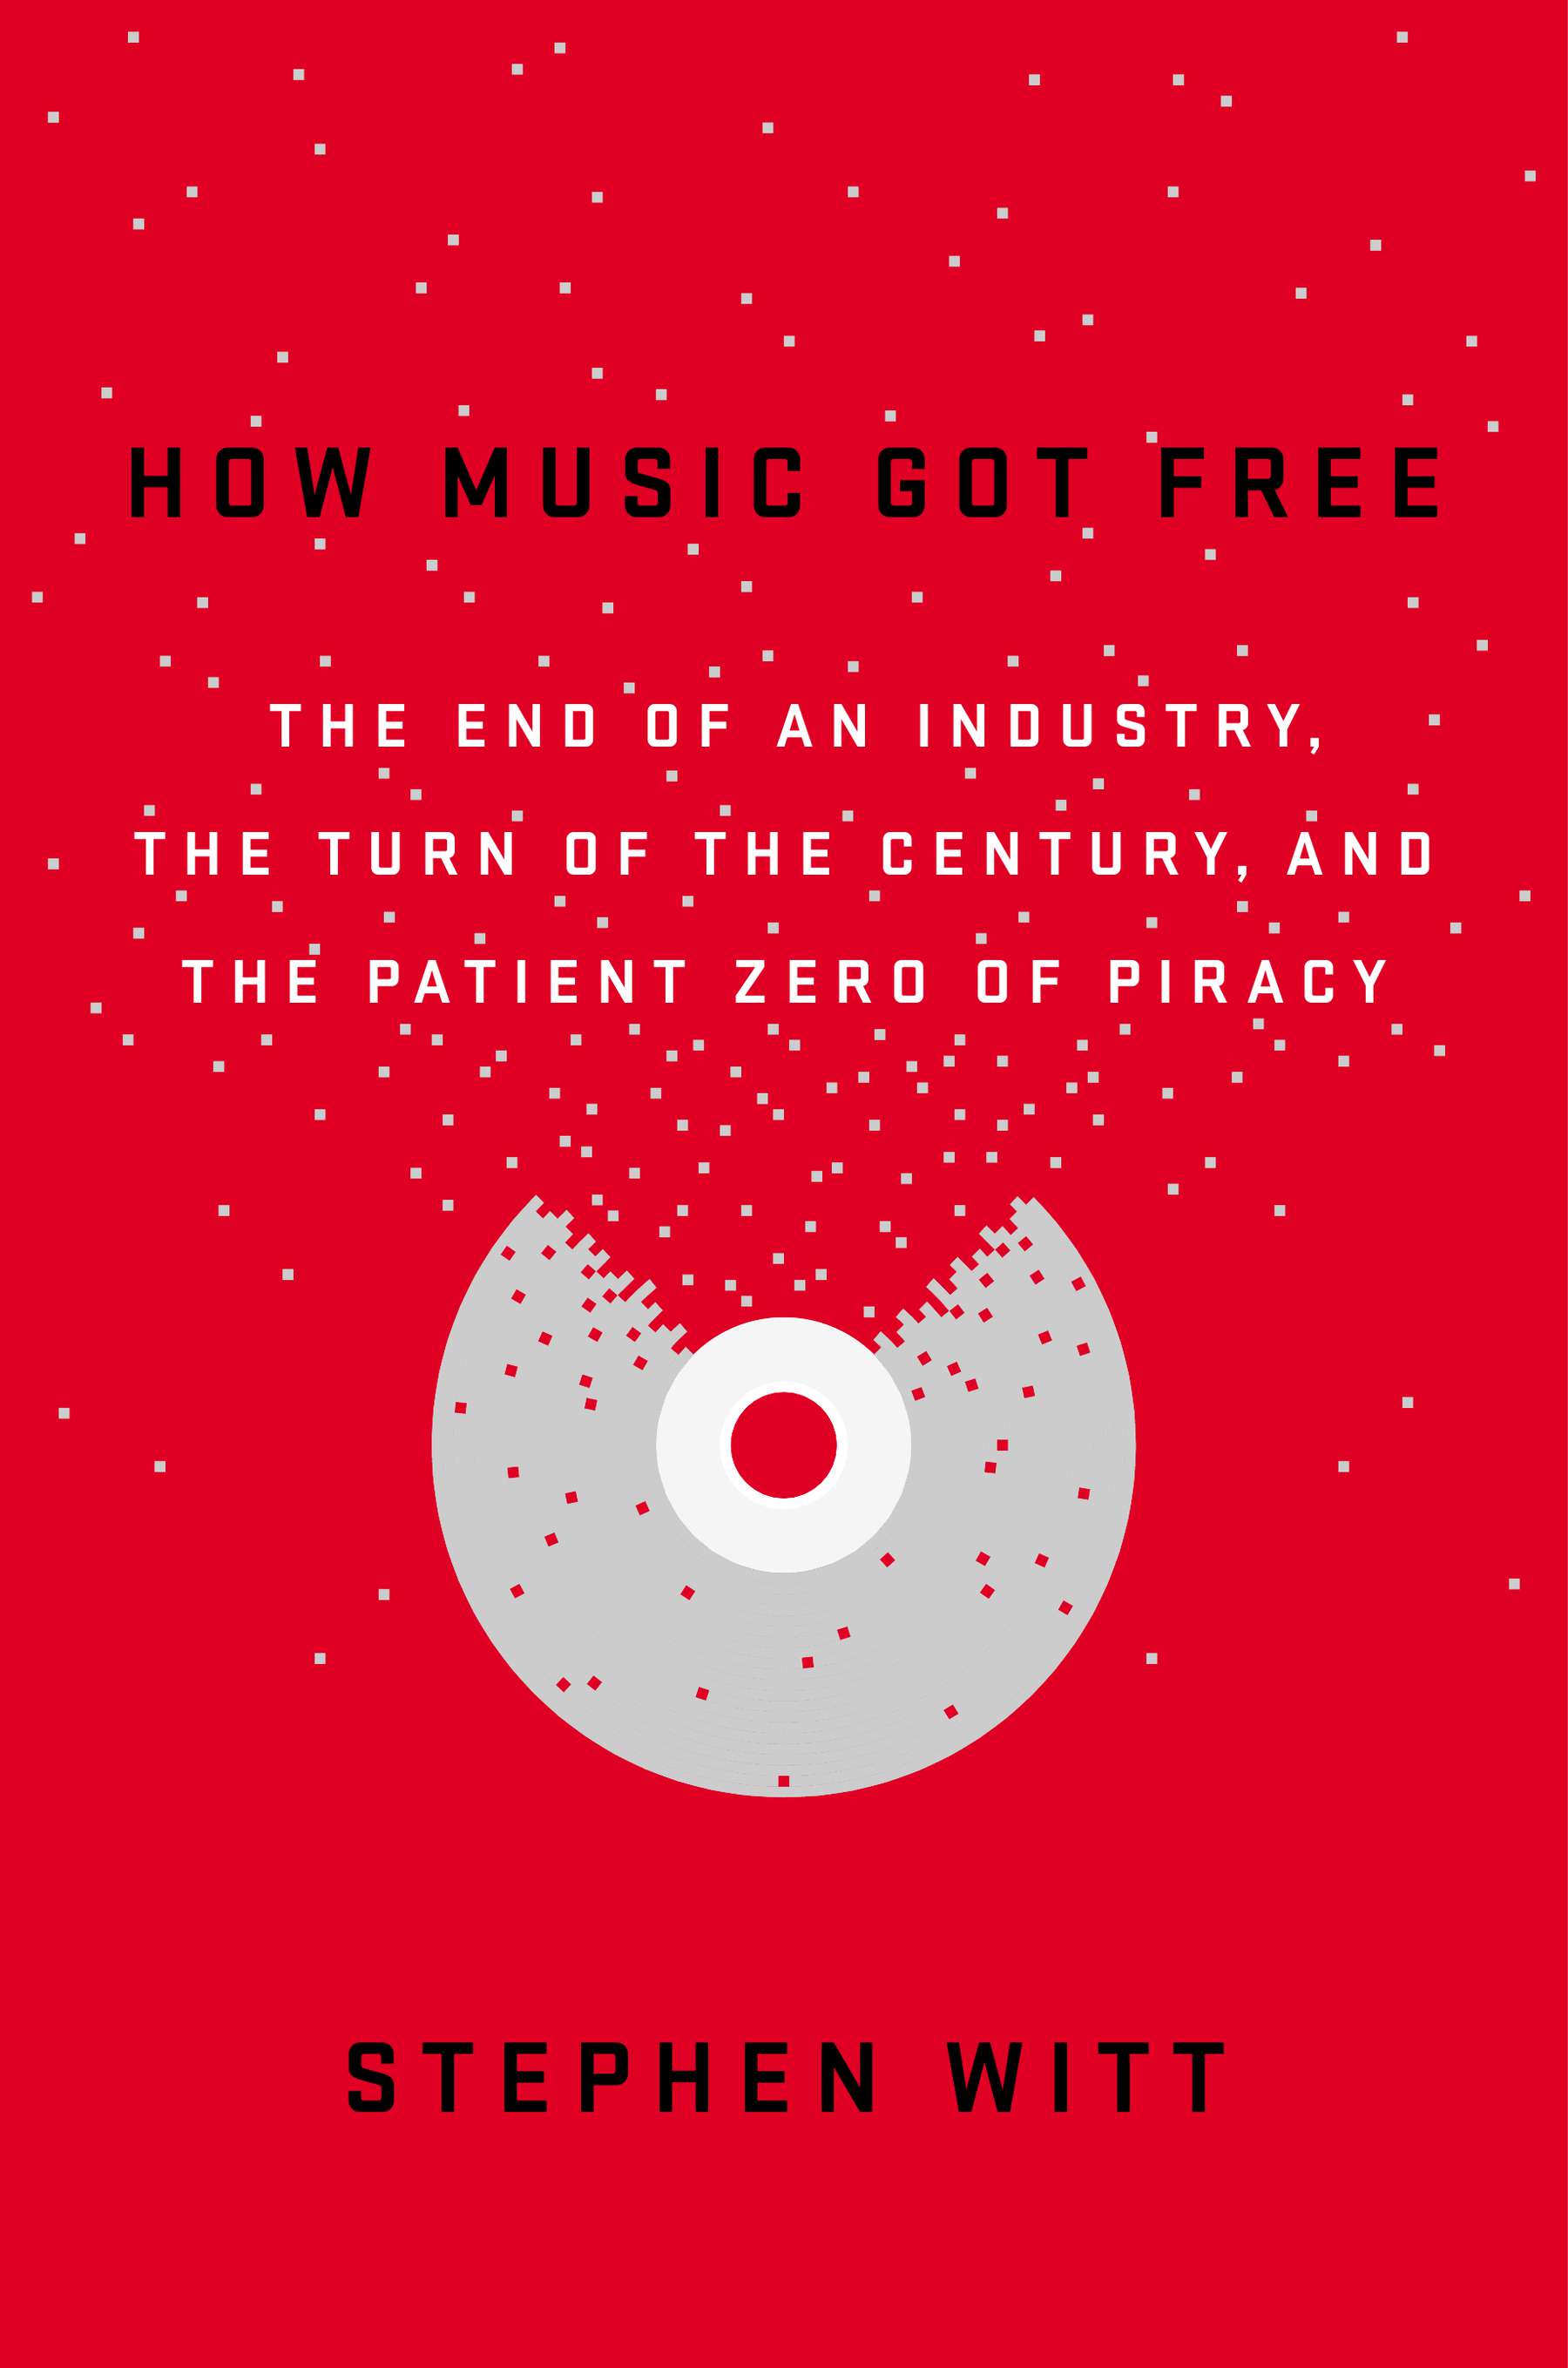 how-music-got-free-book-cover